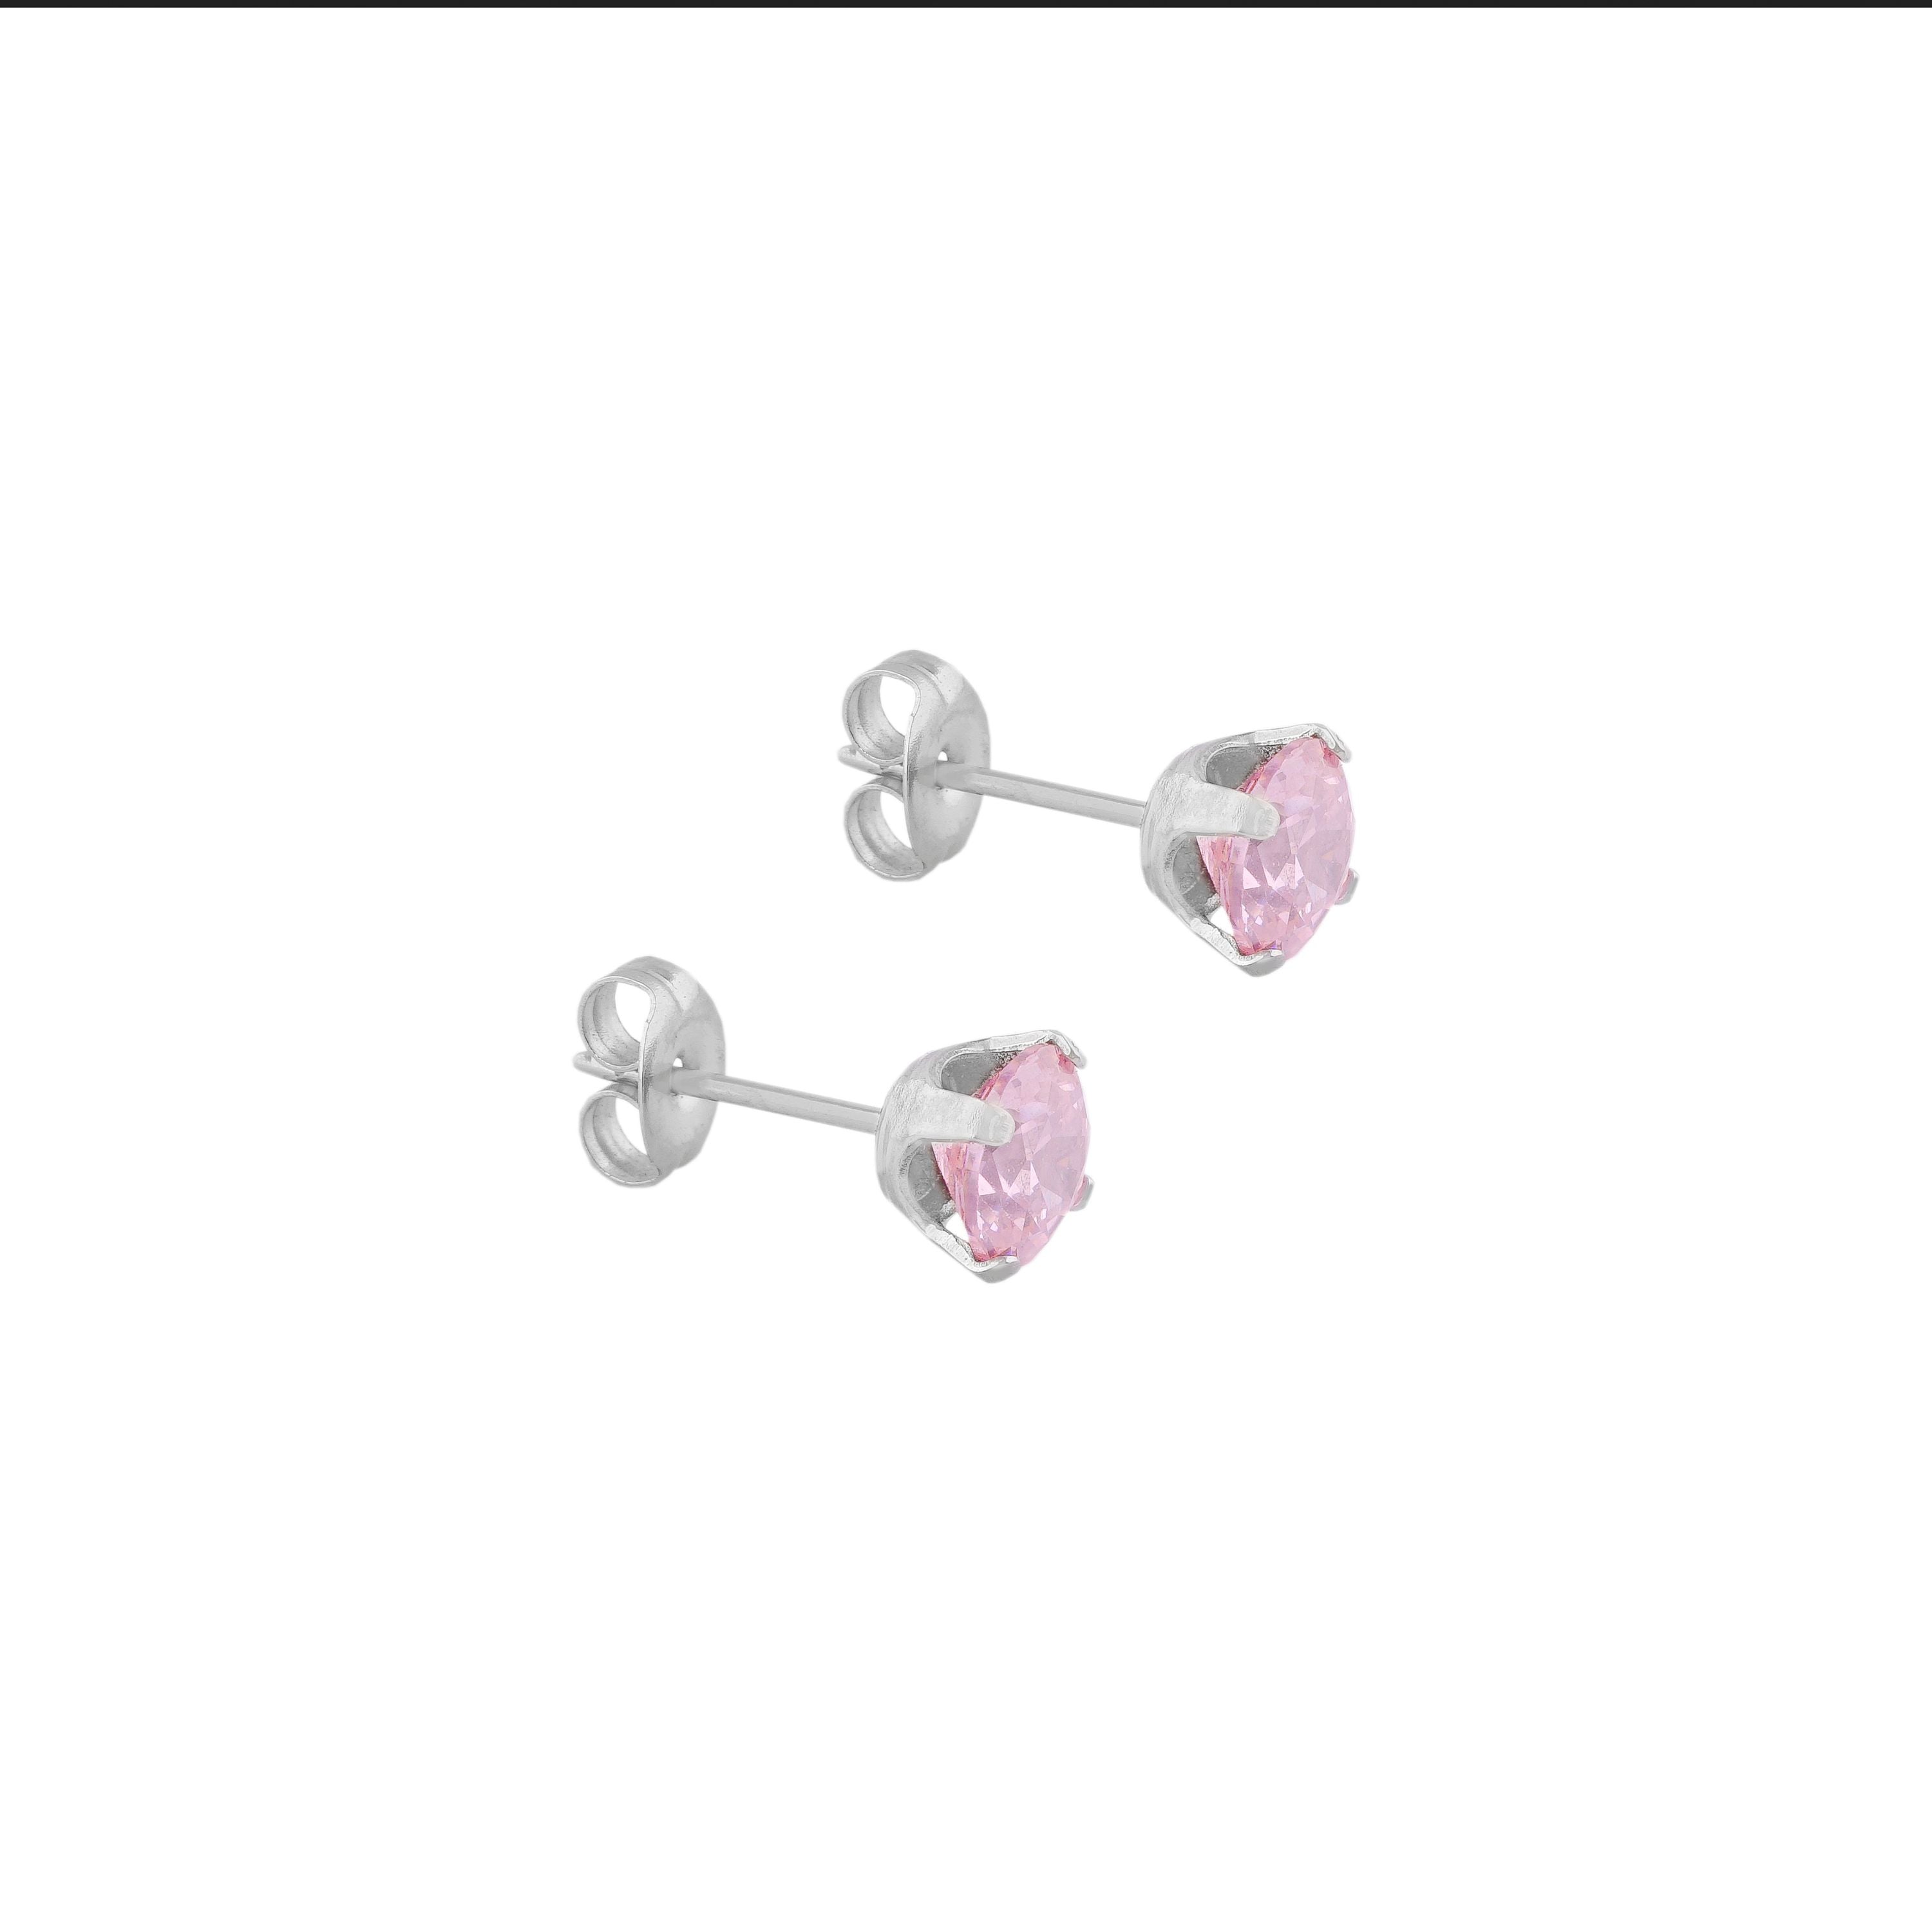 6MM Cubic Zirconia Pink Allergy free Stainless Steel Ear Studs | MADE IN USA | Ideal for everyday wear